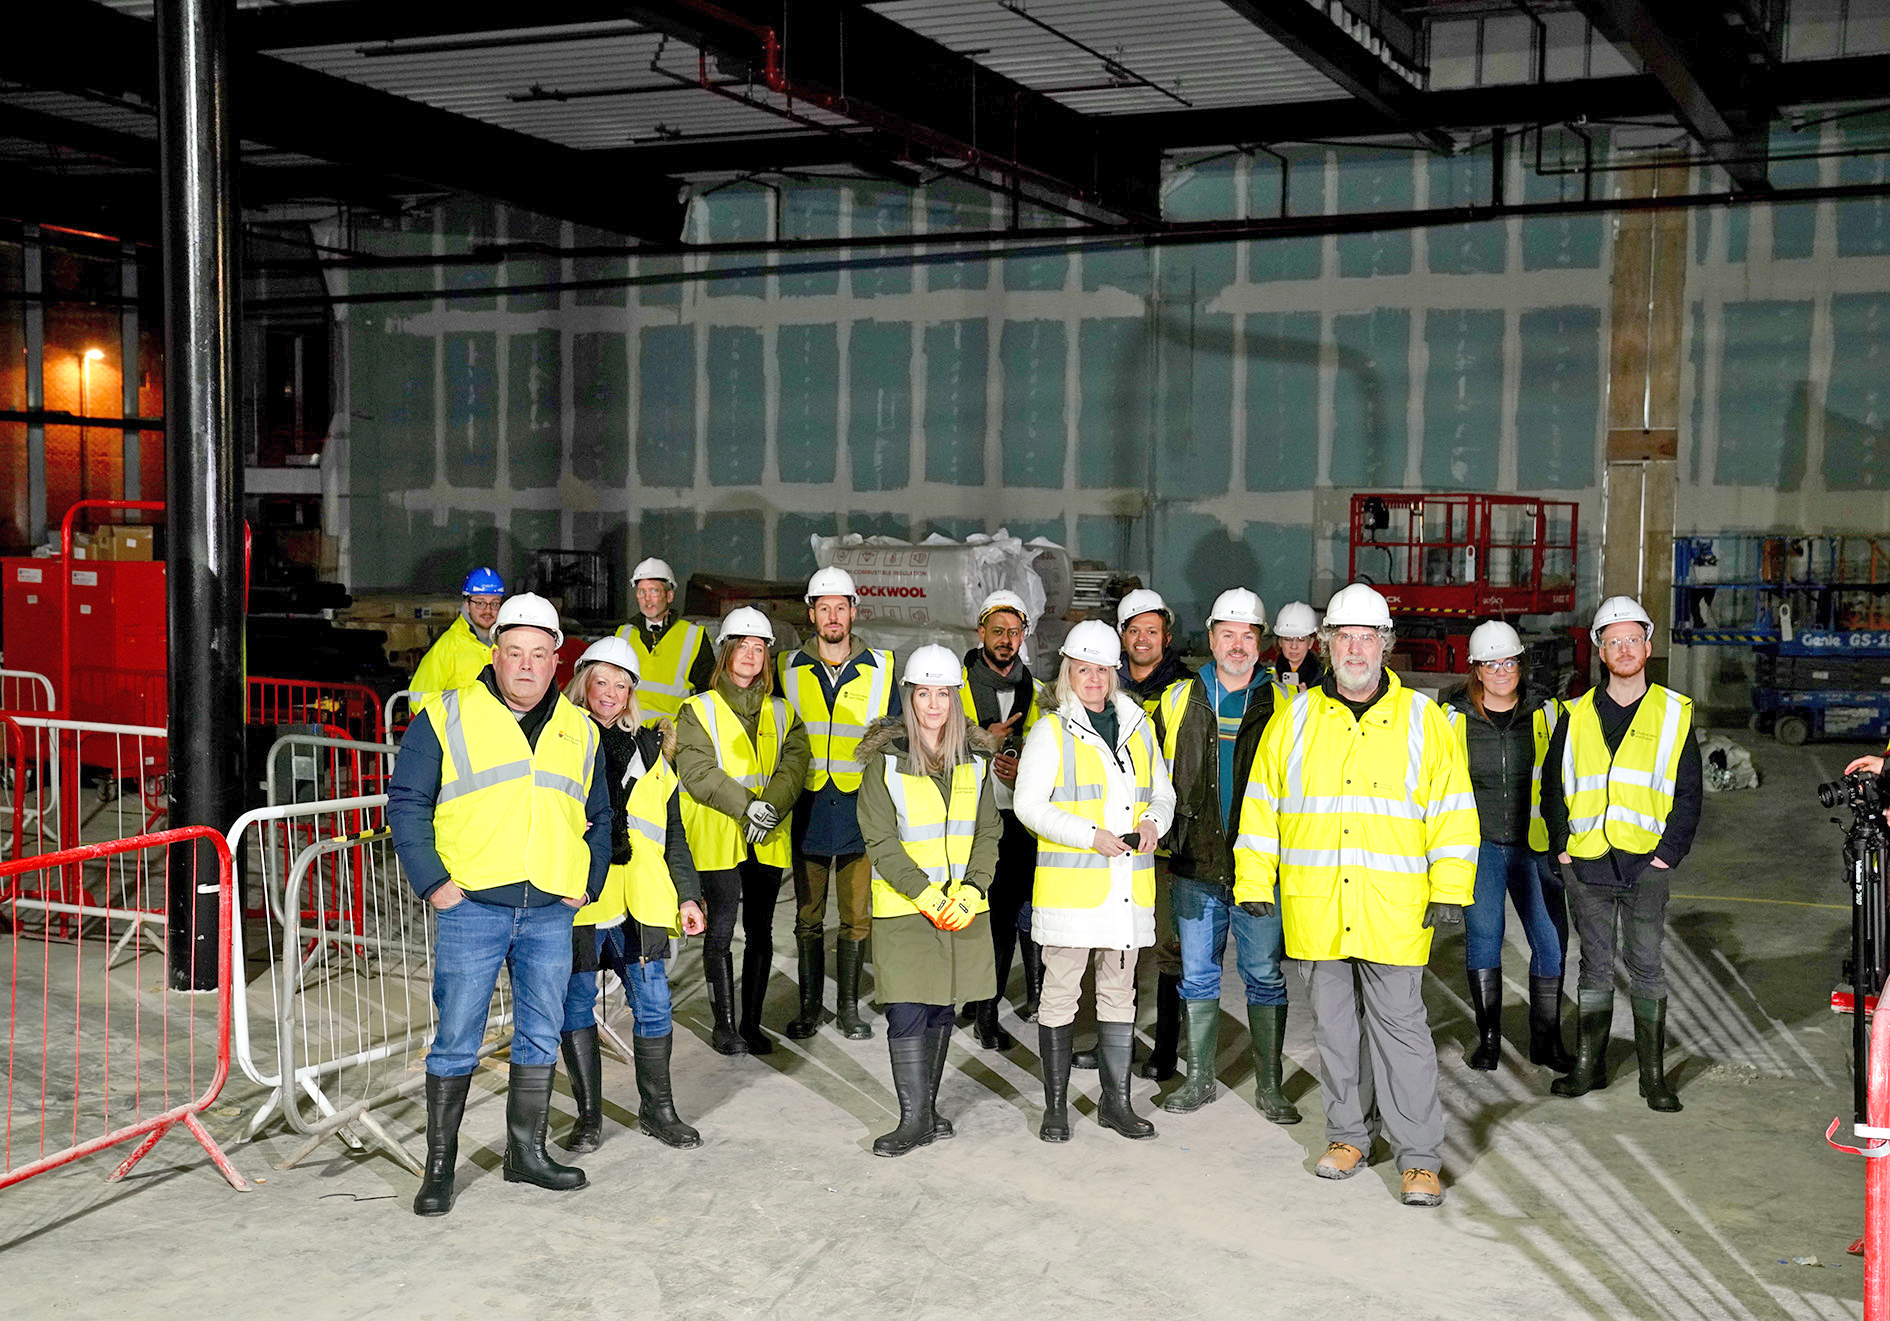 The traders tour the new Chester Market site.